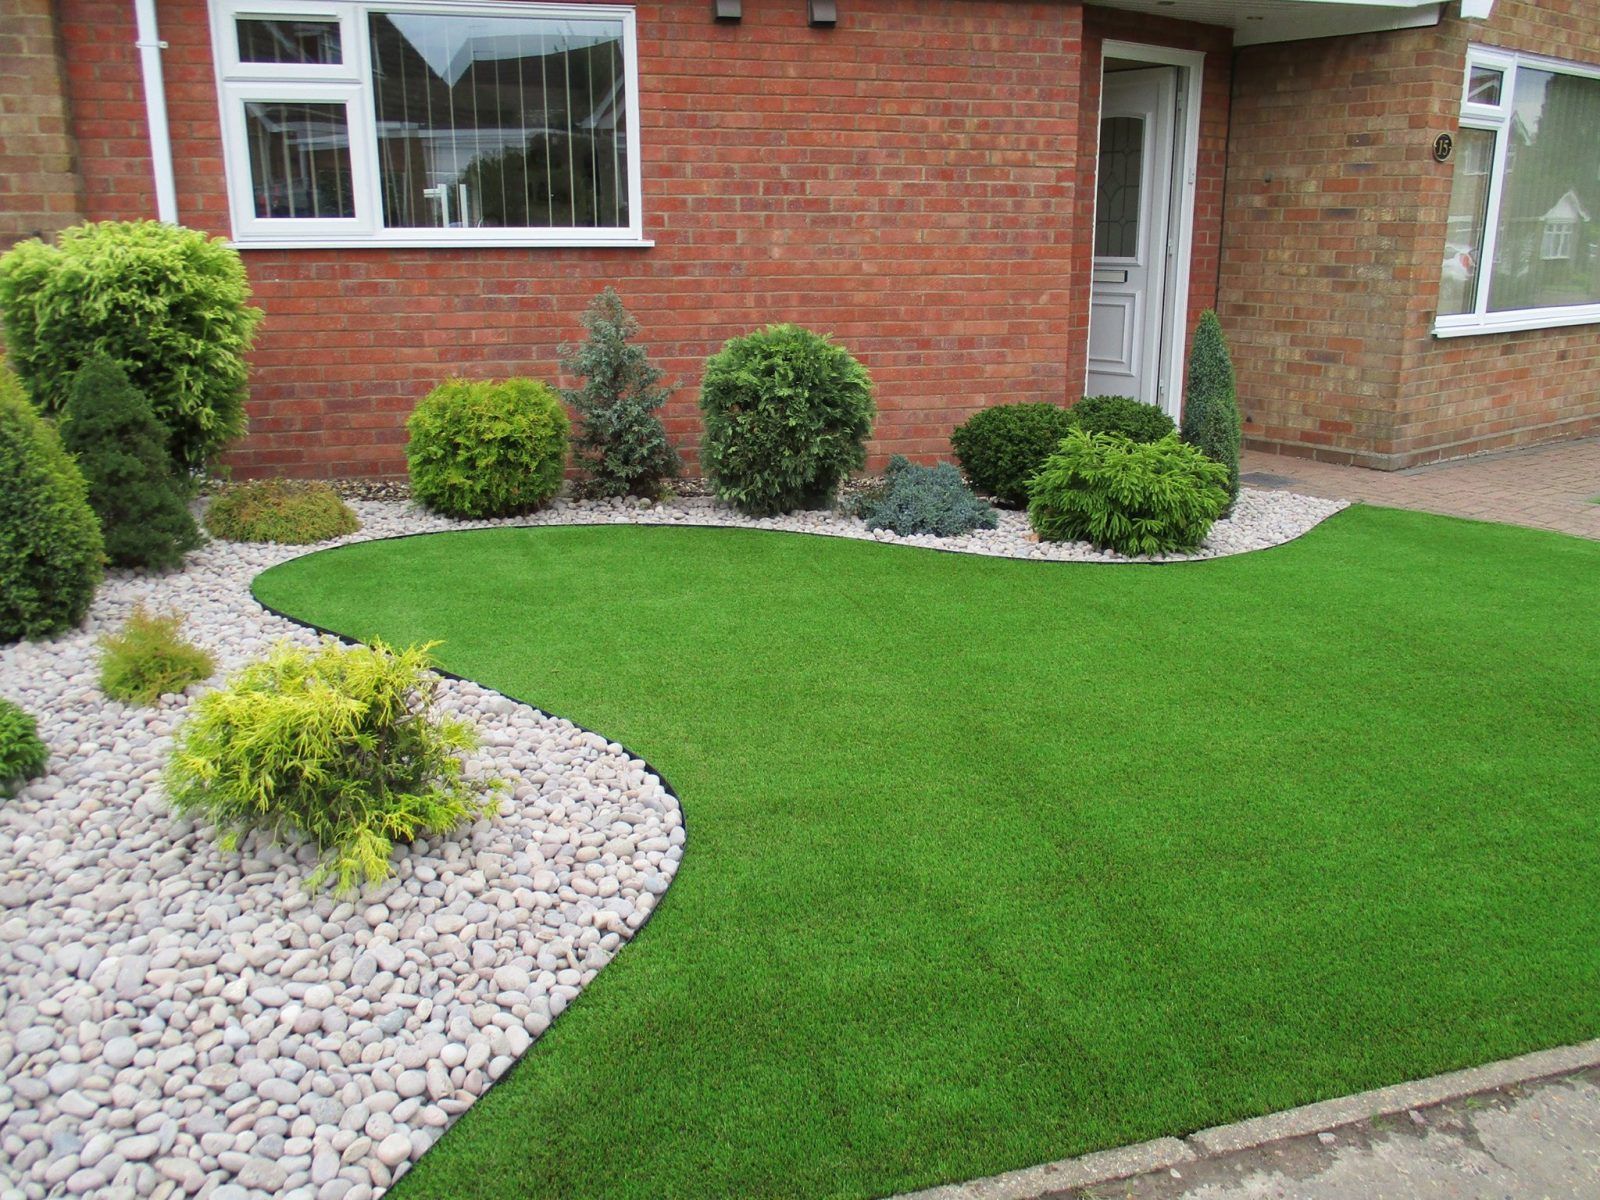 7 Reasons That Artificial Grass Enhances Scenic Beauty Of Your Home In Escondido